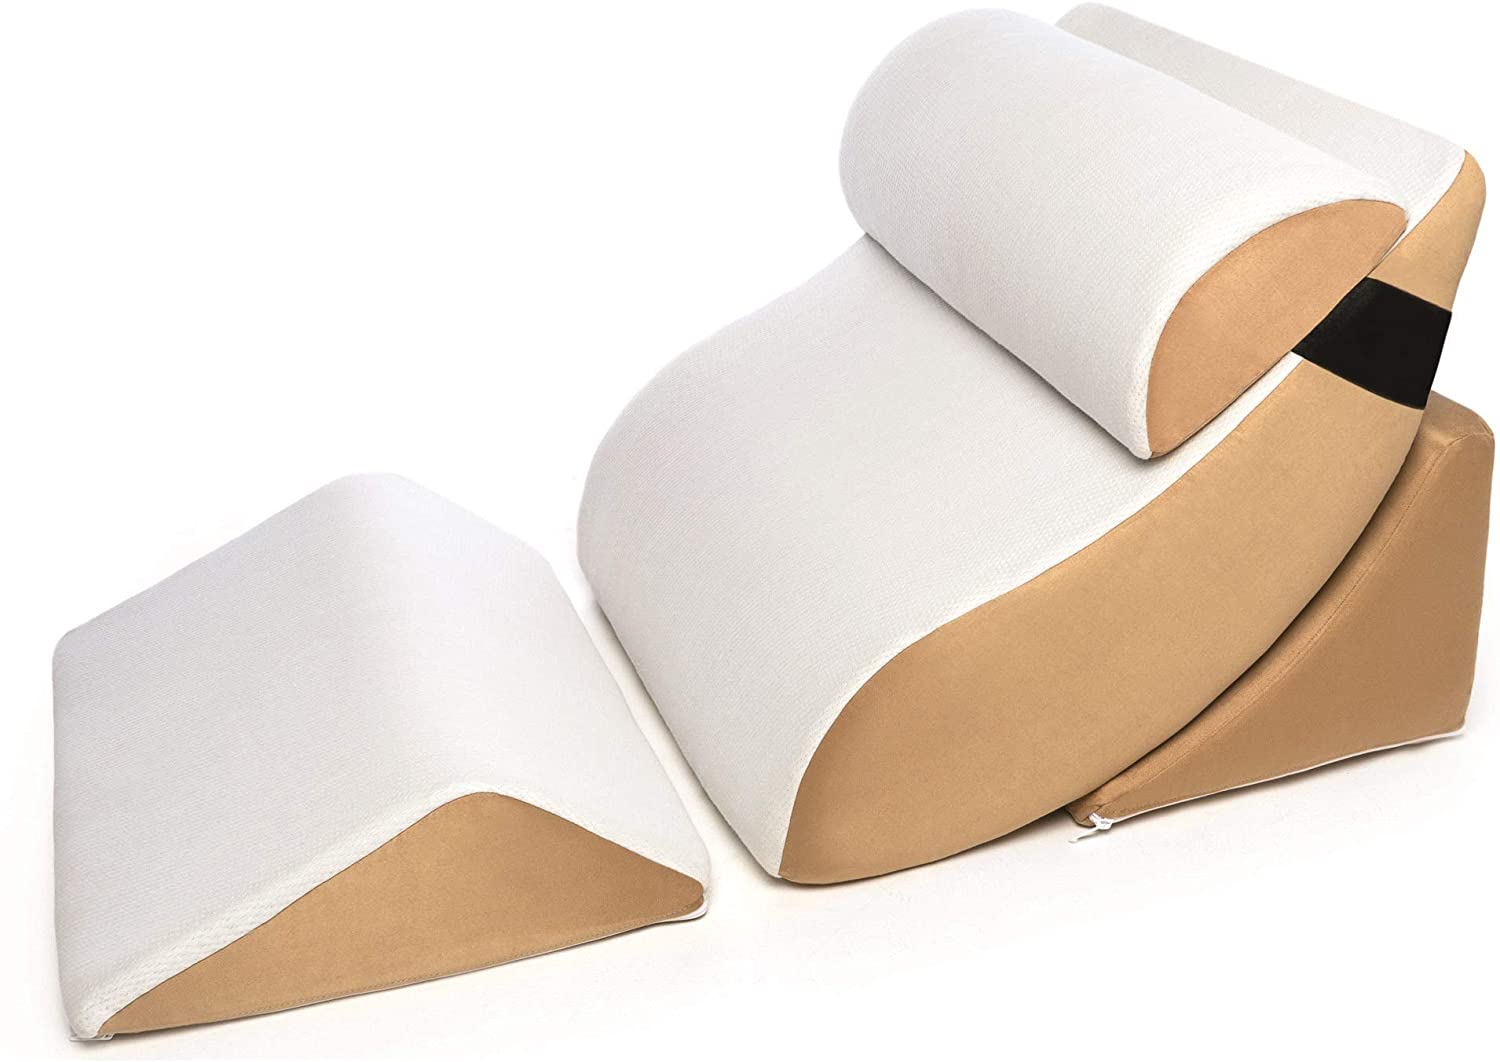 Avana Orthopedic Support Pillow with Bamboo Cover